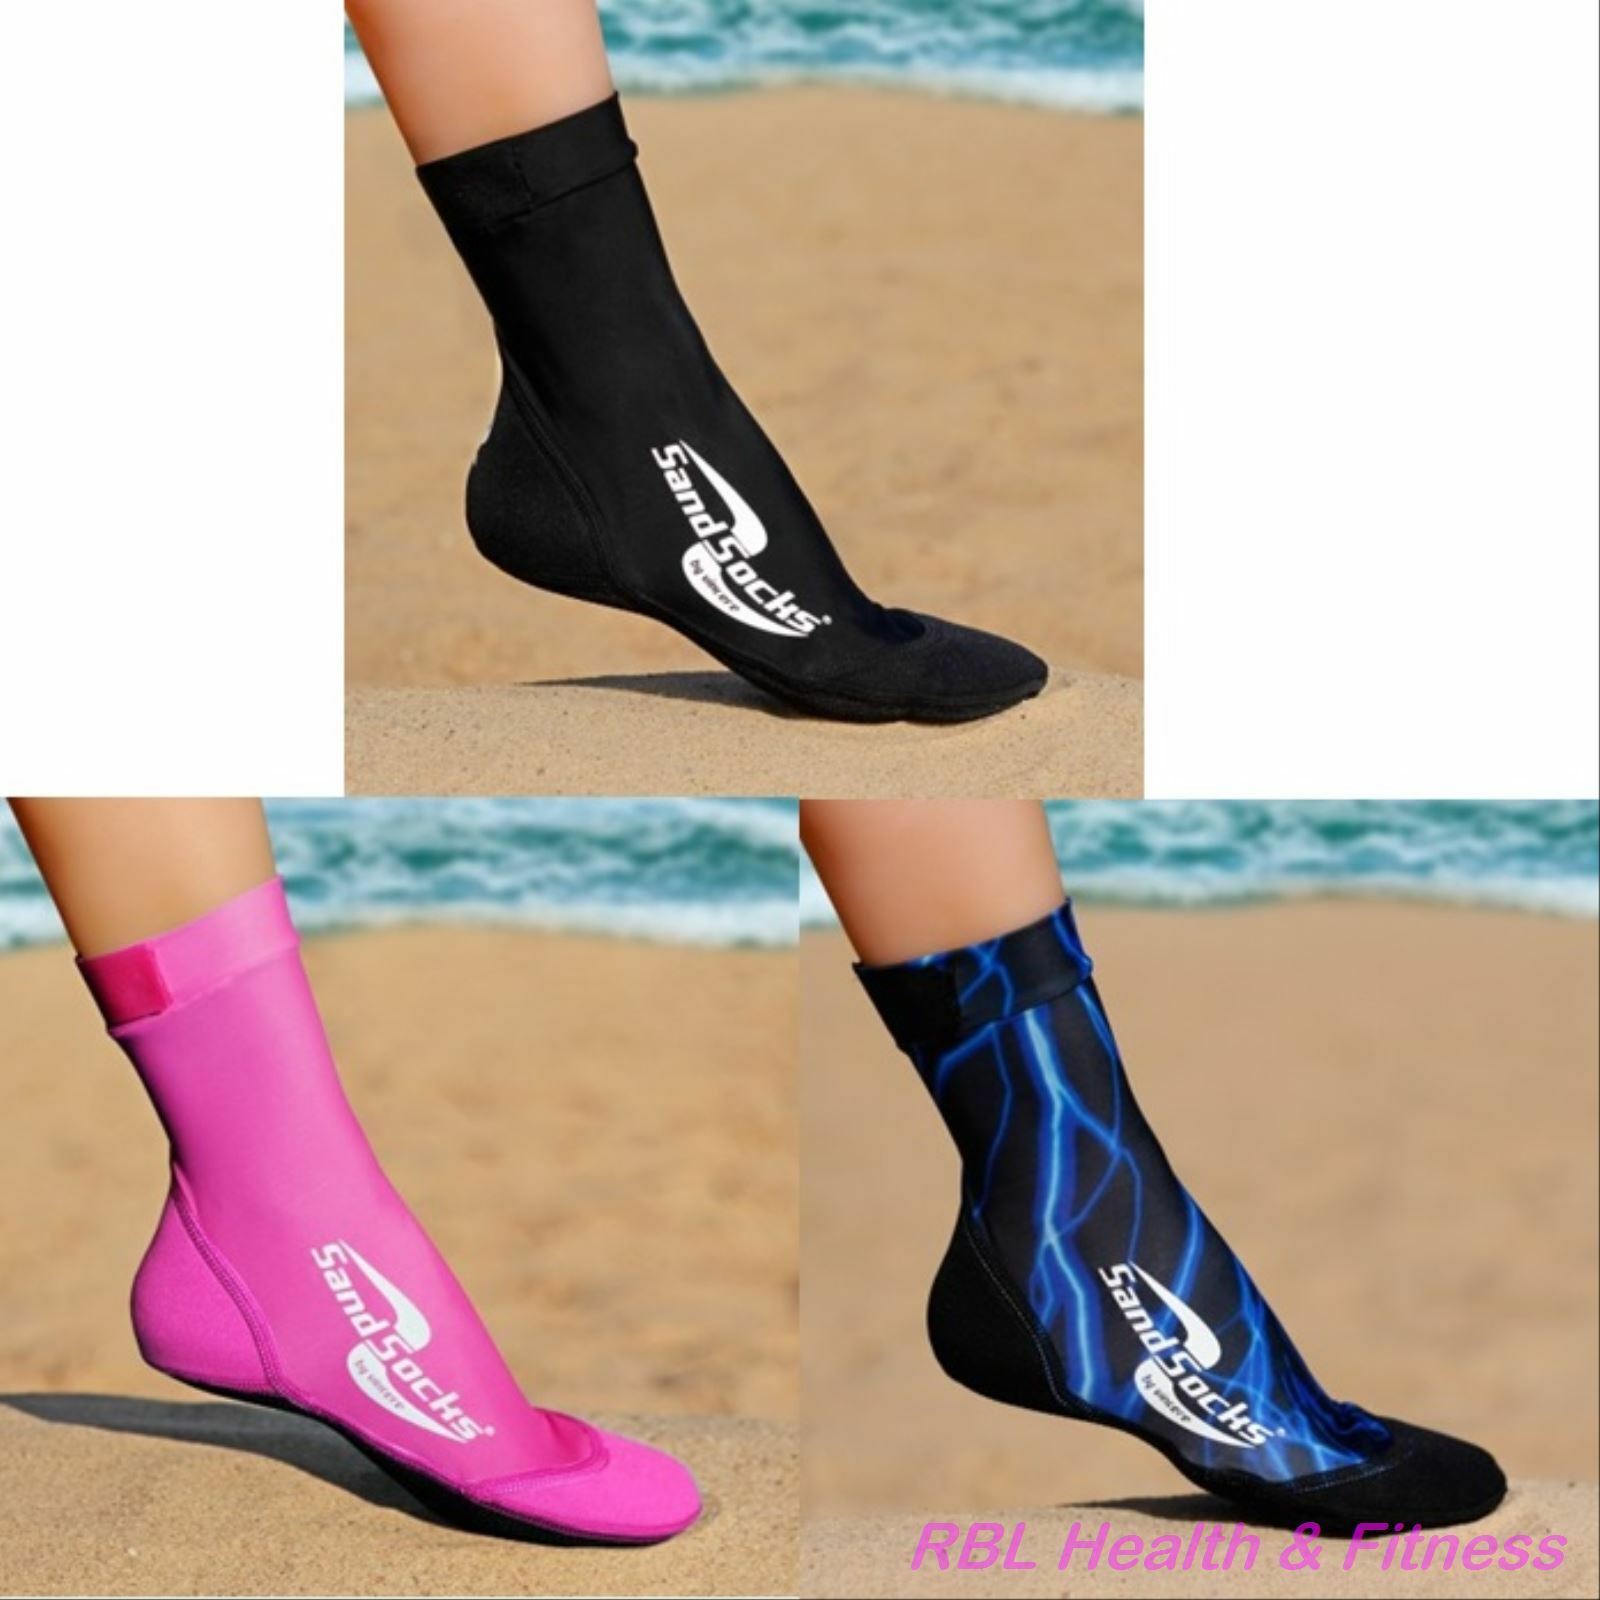 Vincere Sand Socks - Beach Volleyball - Sand Soccer - Water Sports - Snorkeling